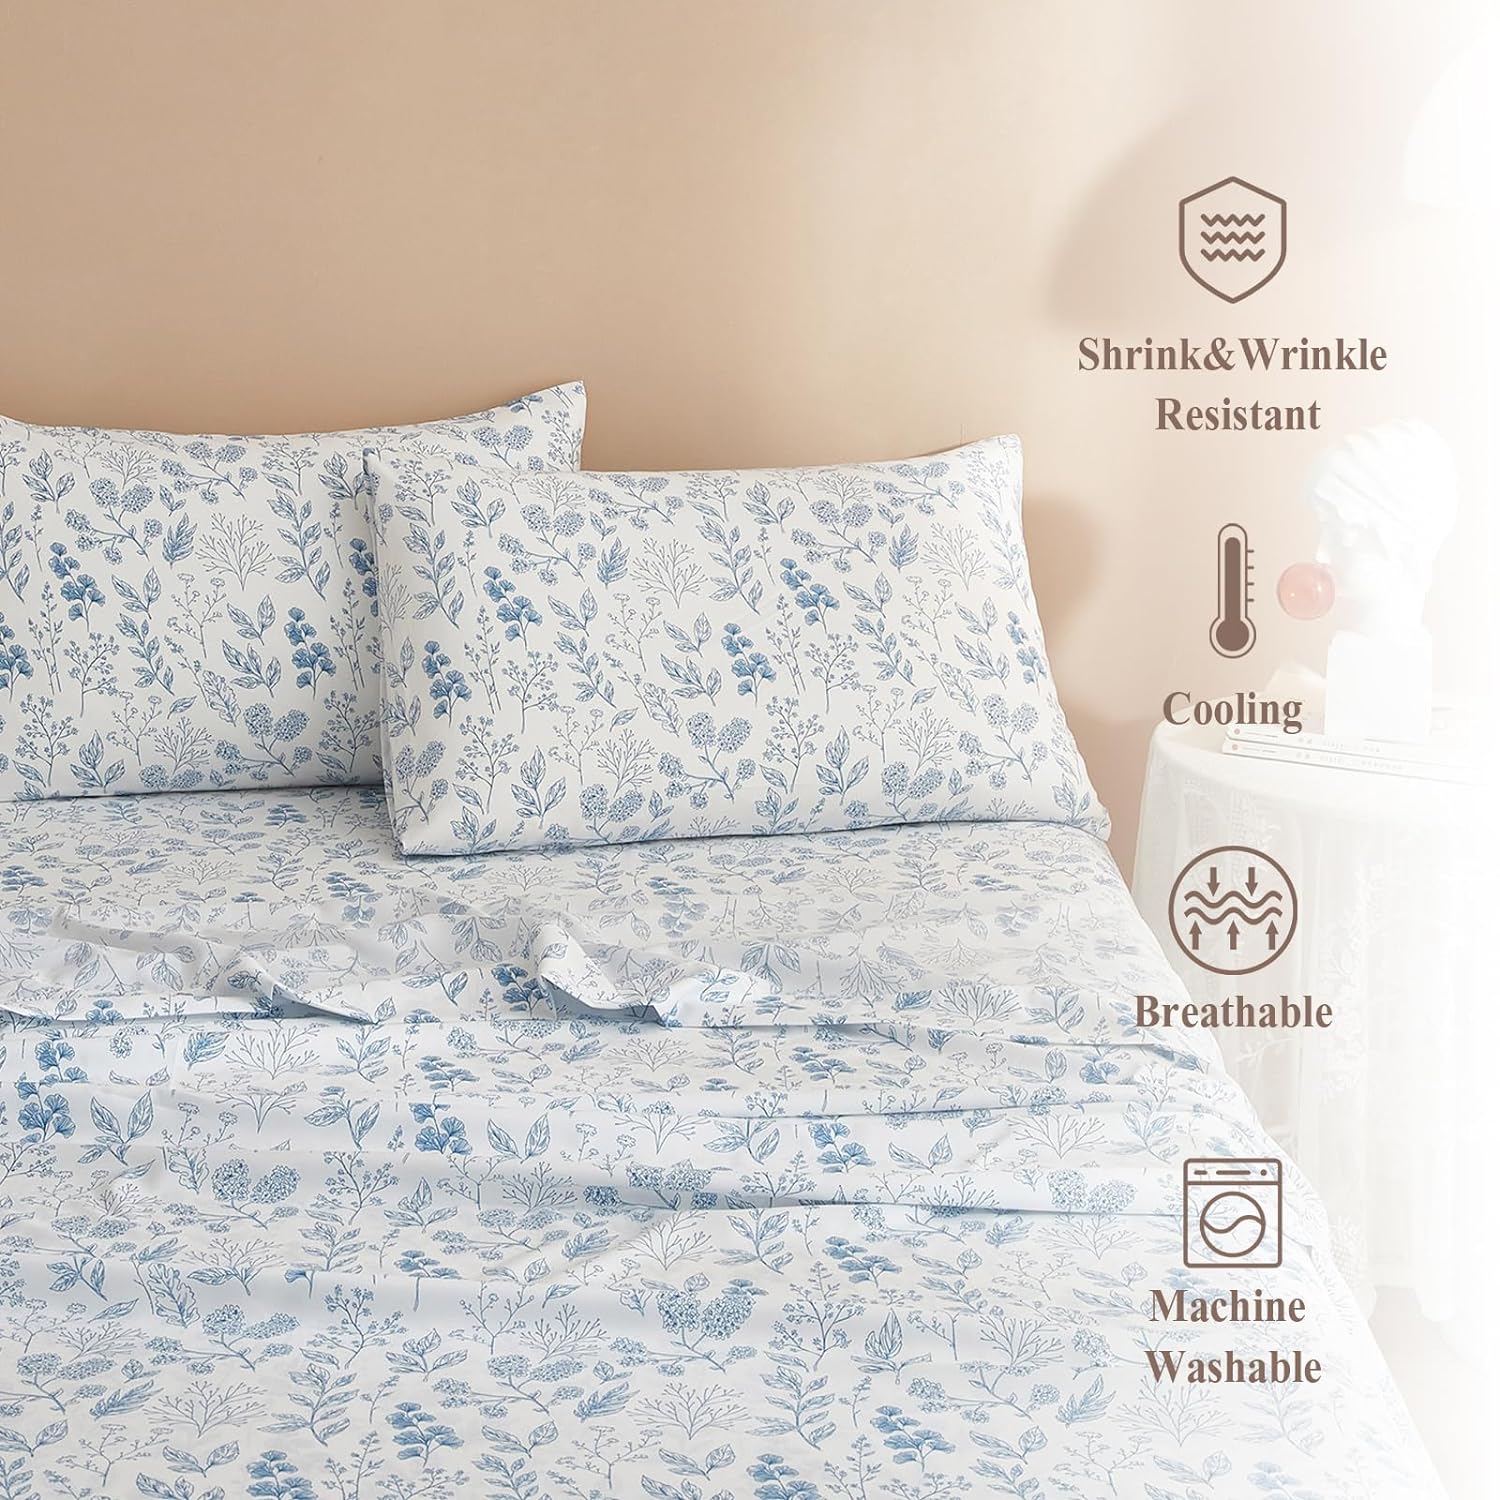 thinkstar Blue Floral King Sheets Set 4 Piece Cooling Bedding Sheet Set - Luxury Soft White Deep Pocket 16" - Easy Soft Fitted She…